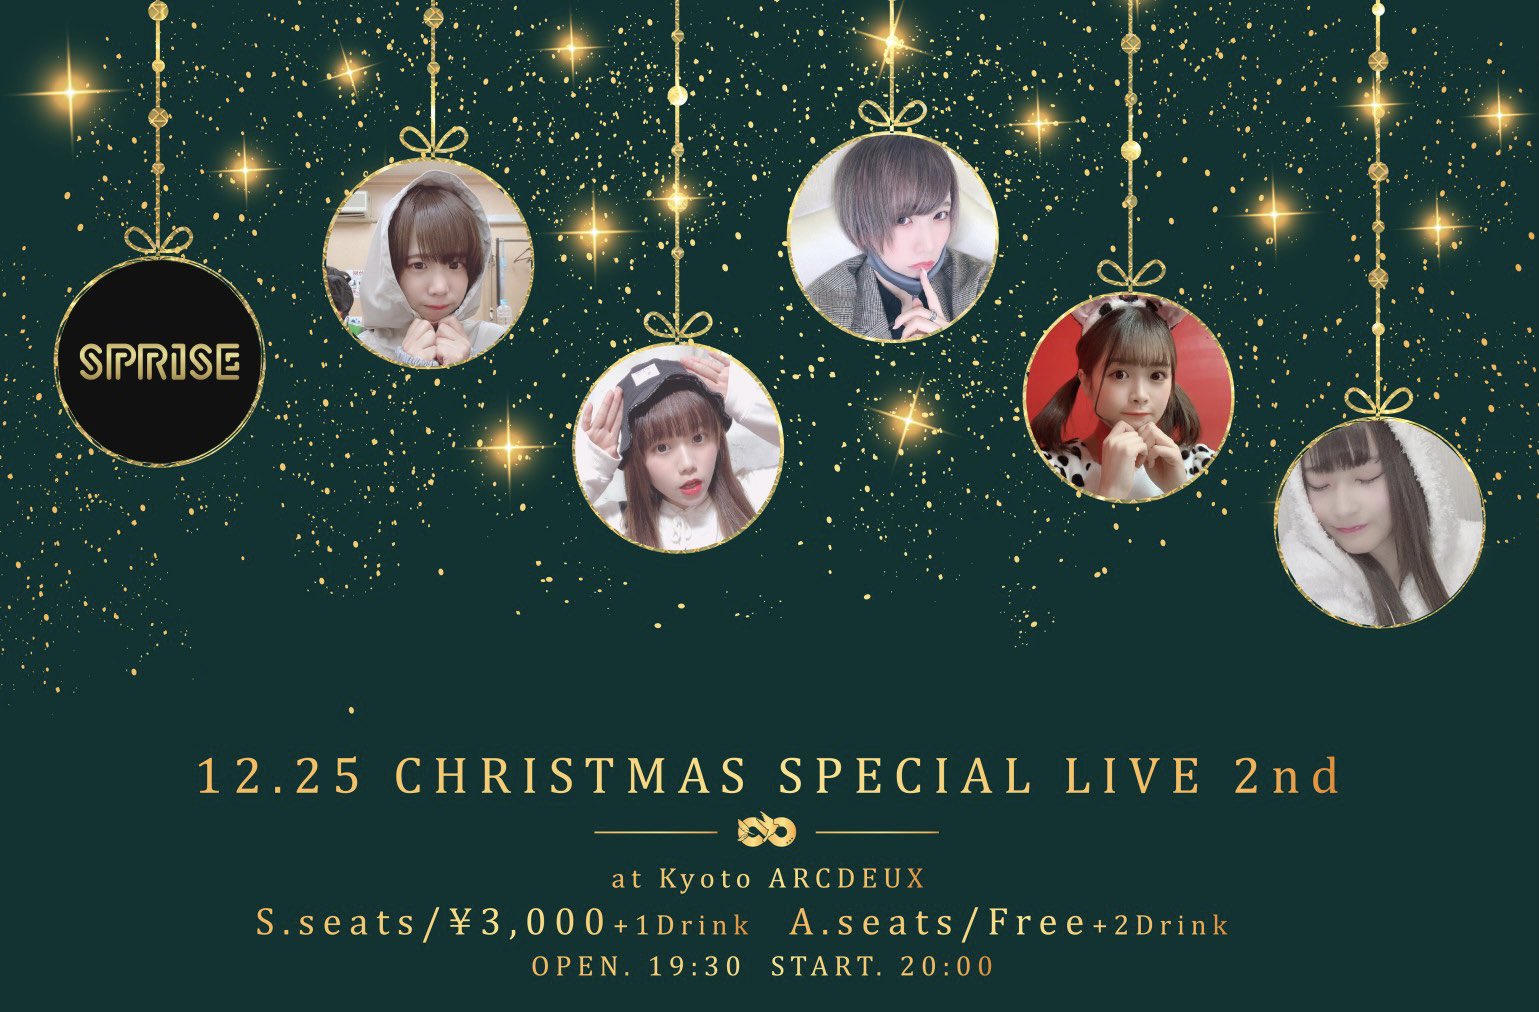 SPRISE CHRISTMAS SPECIAL LIVE 2nd